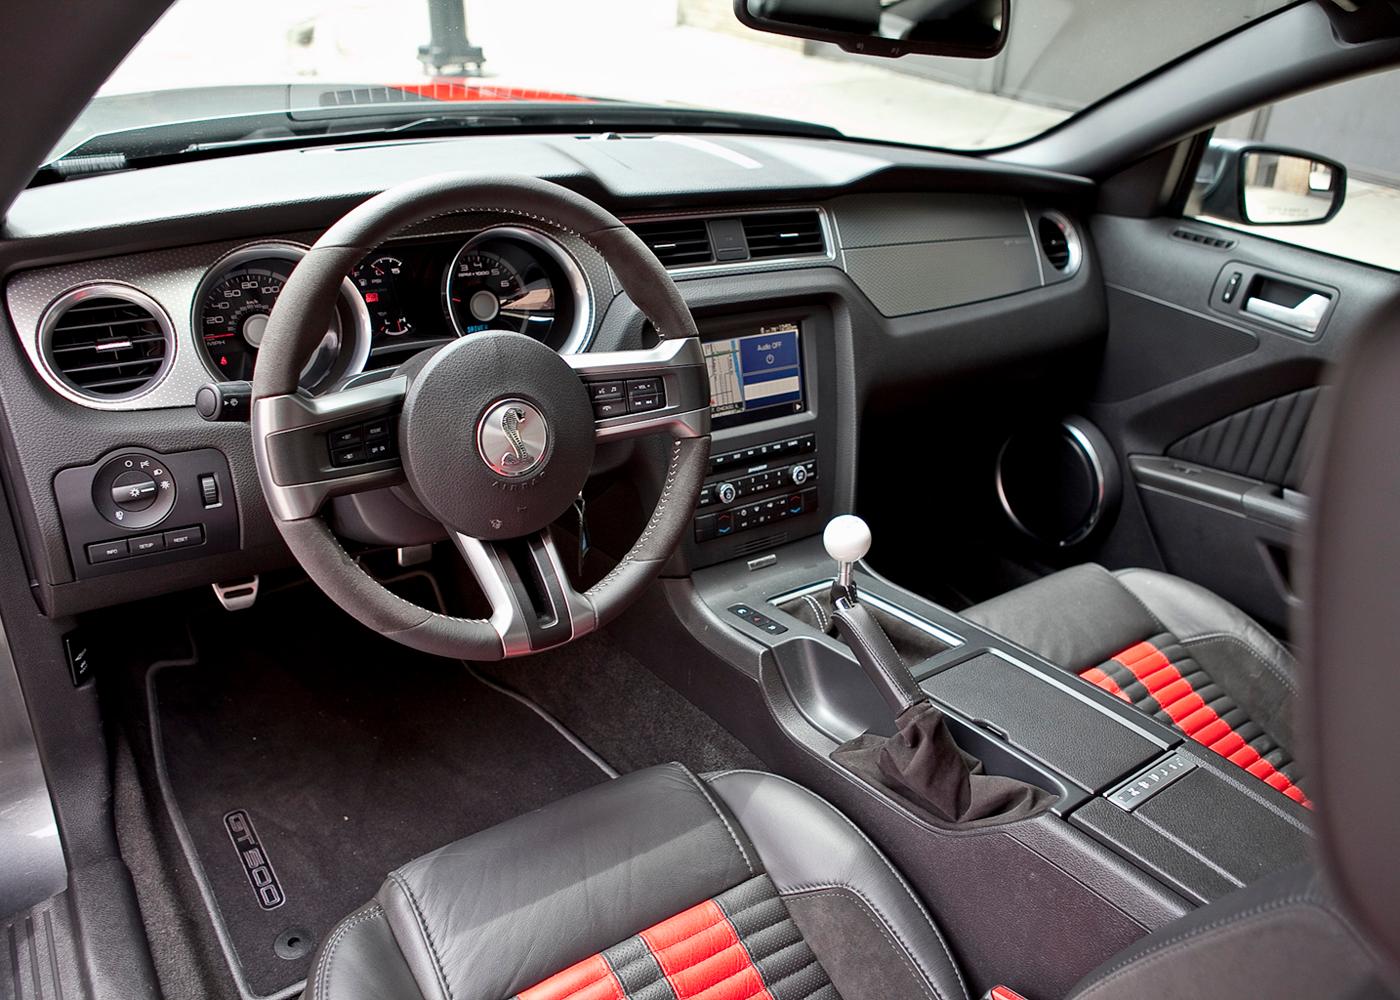 20101117_110411_2011_Ford_Mustang_Shelby_GT500_interior_image.jpg